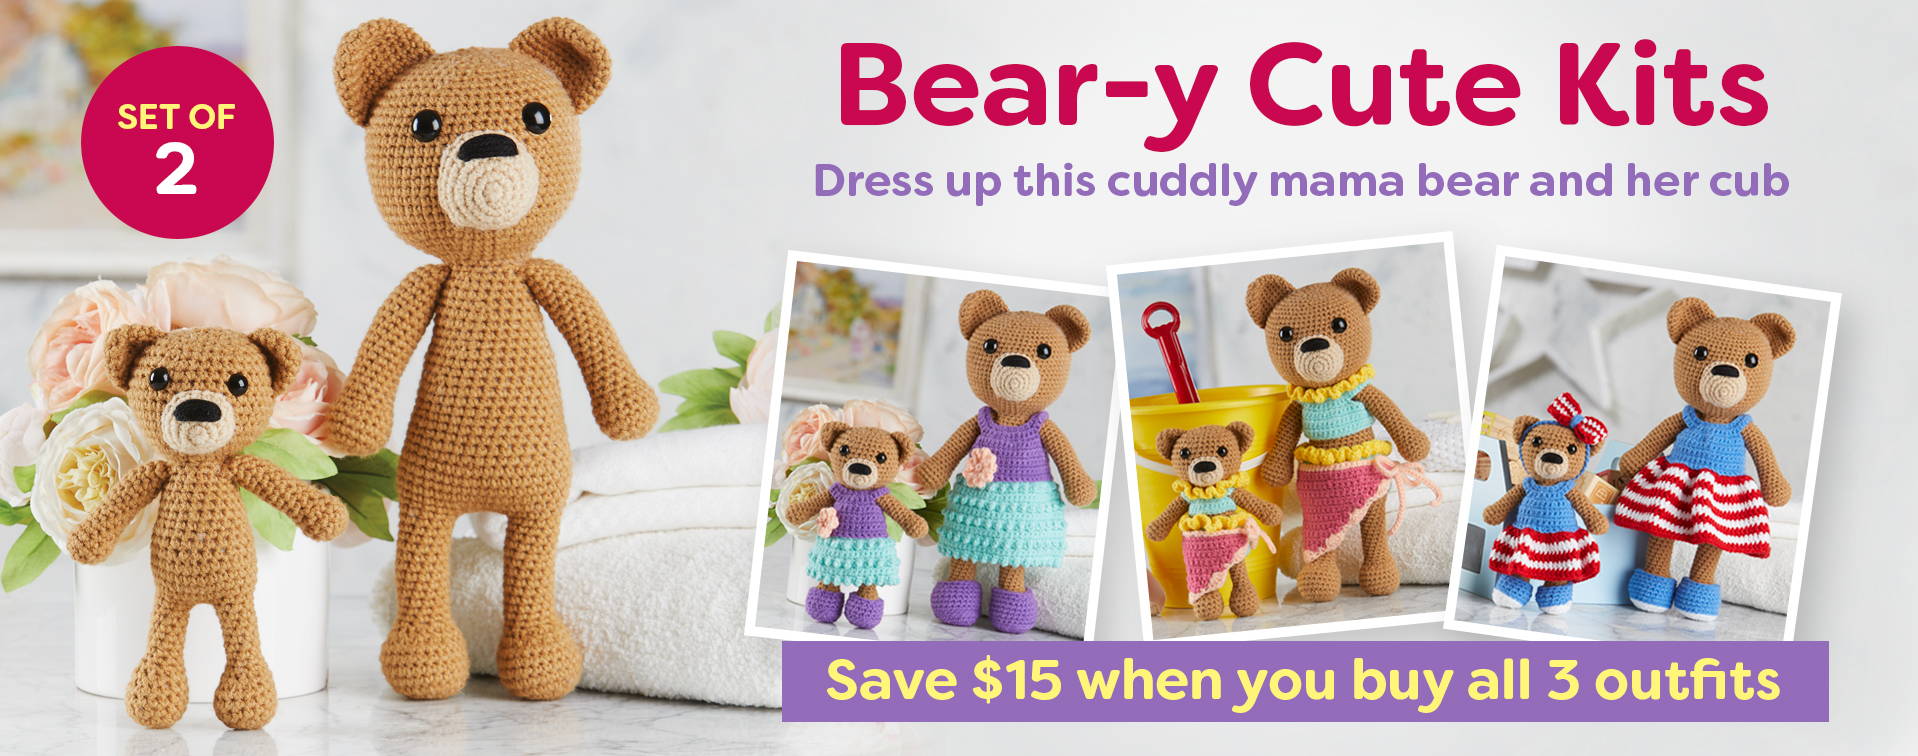 Set of 2: cuddly mama bear and baby cub Bear-y Cute Kits with 3 options for matching outfits